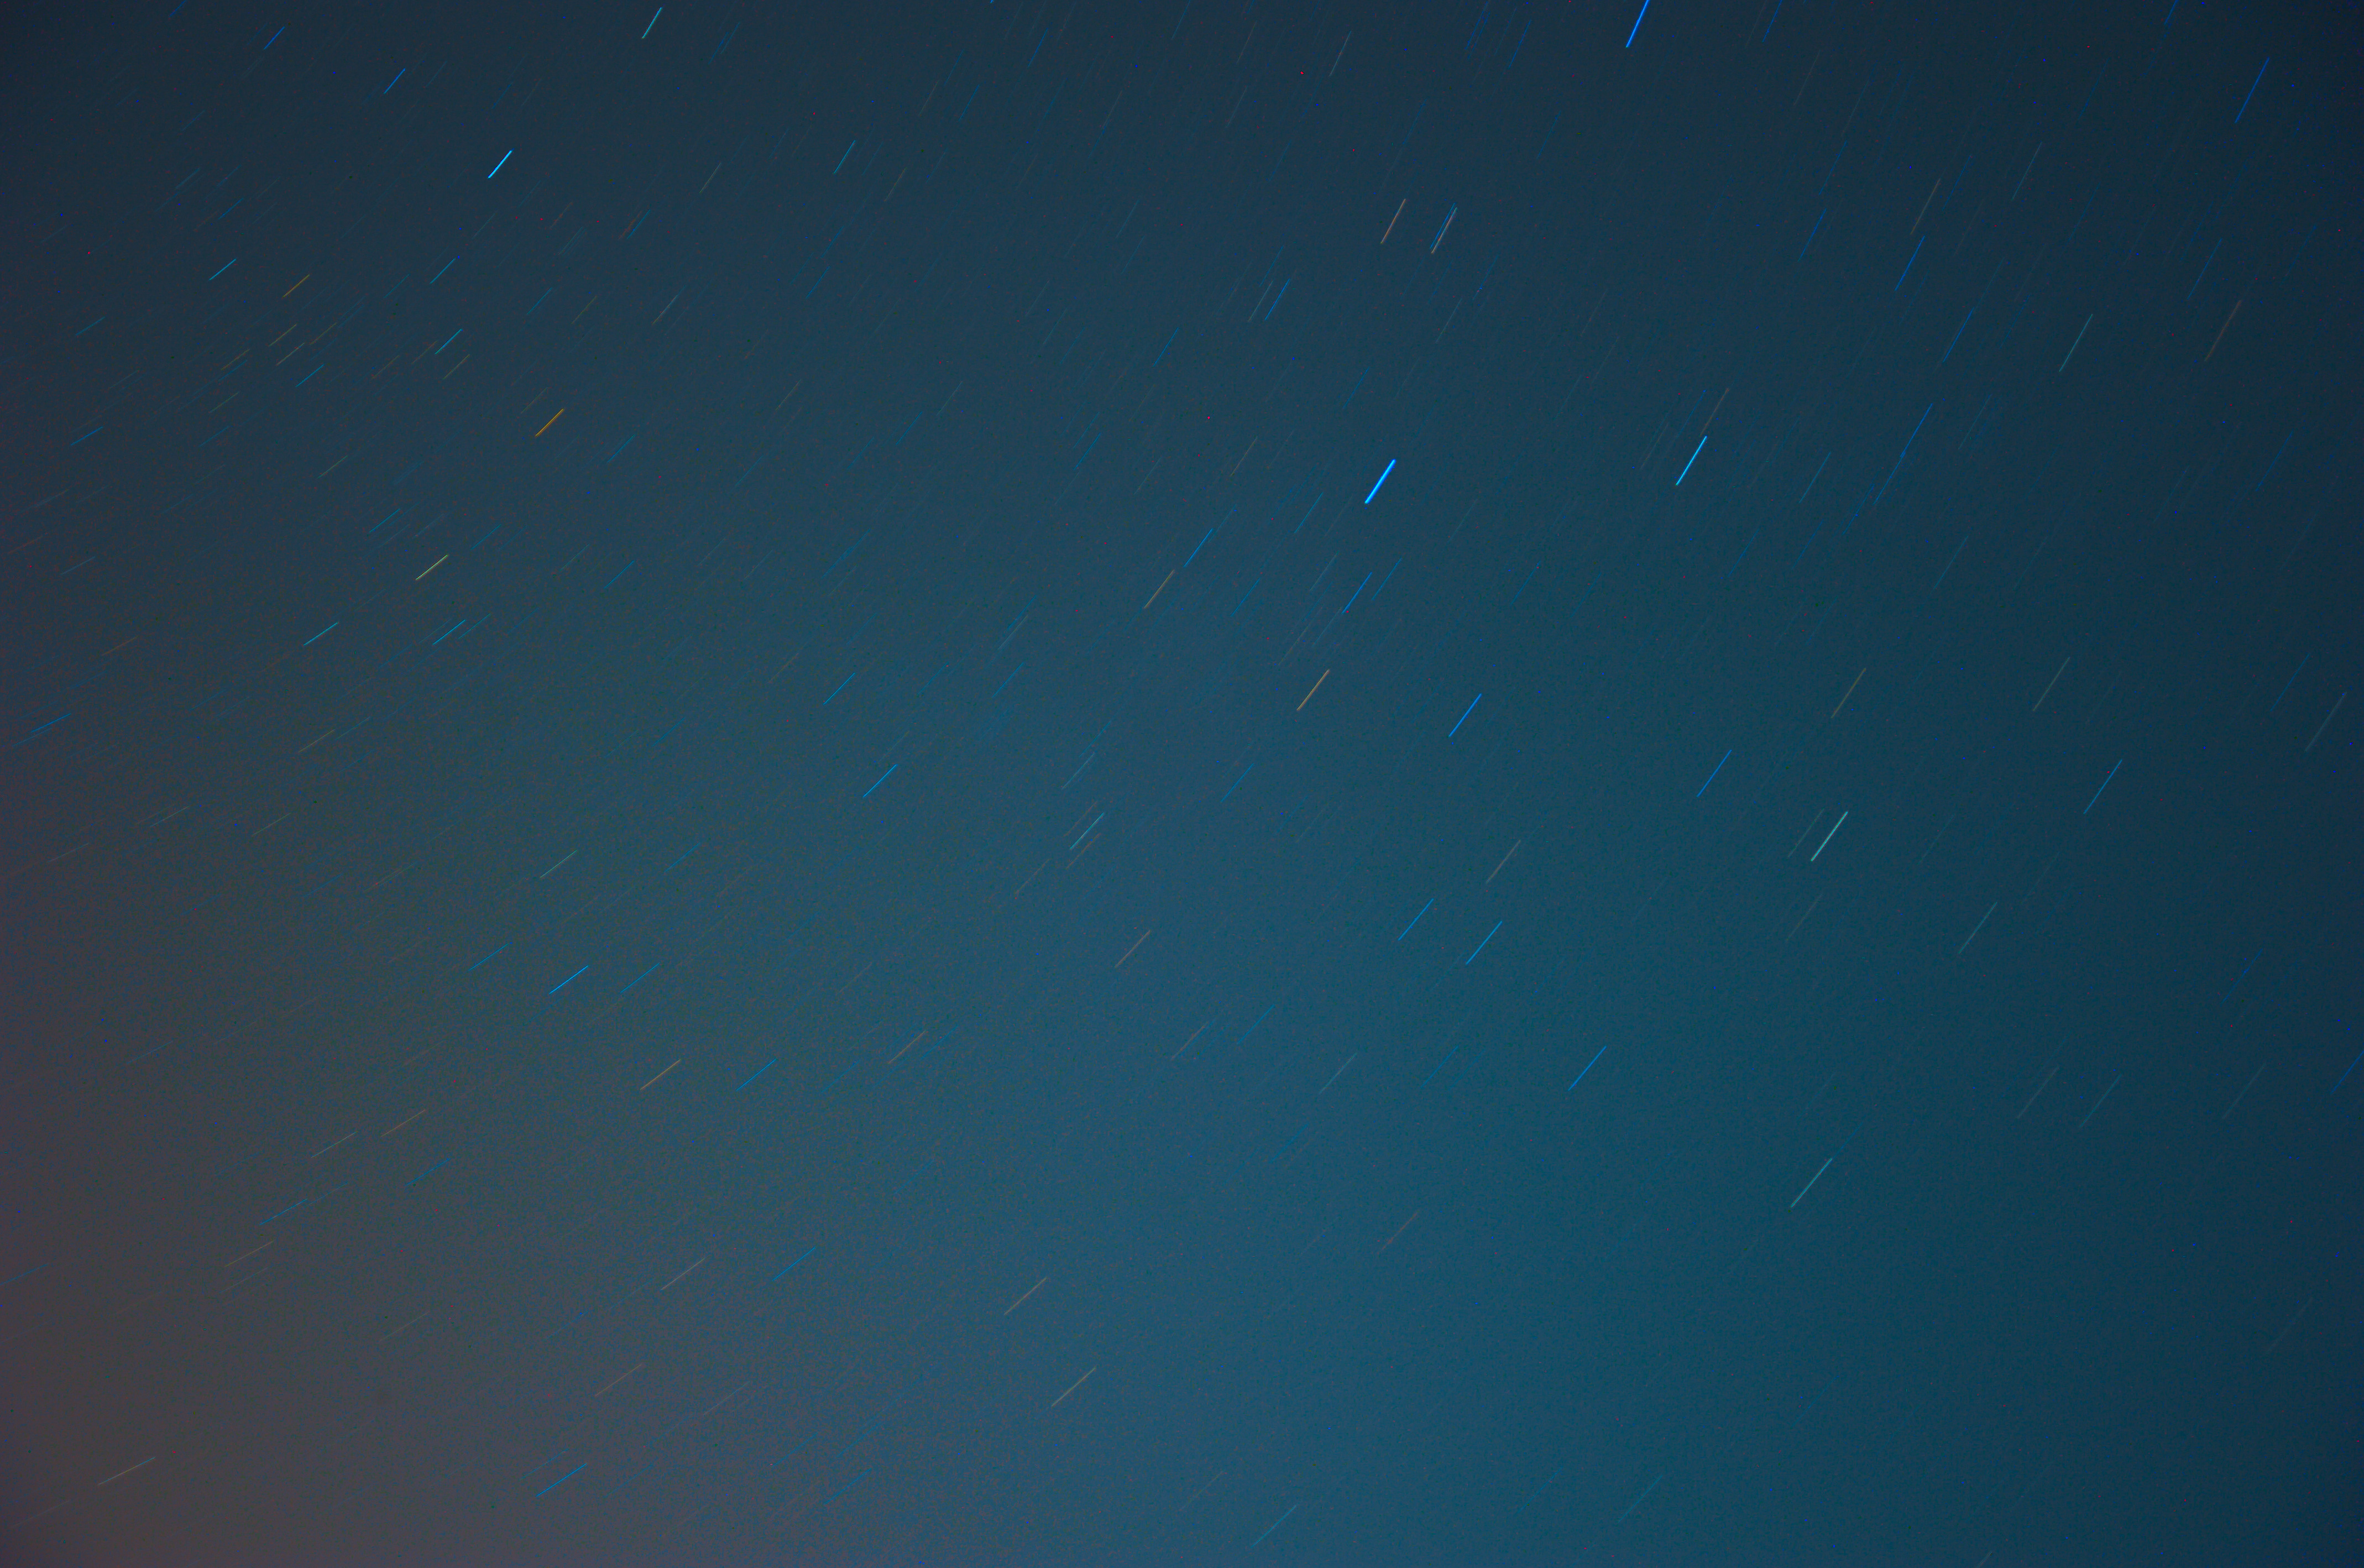 General 4276x2836 stars star trails night long exposure clear sky light trails photography gradient simple background minimalism